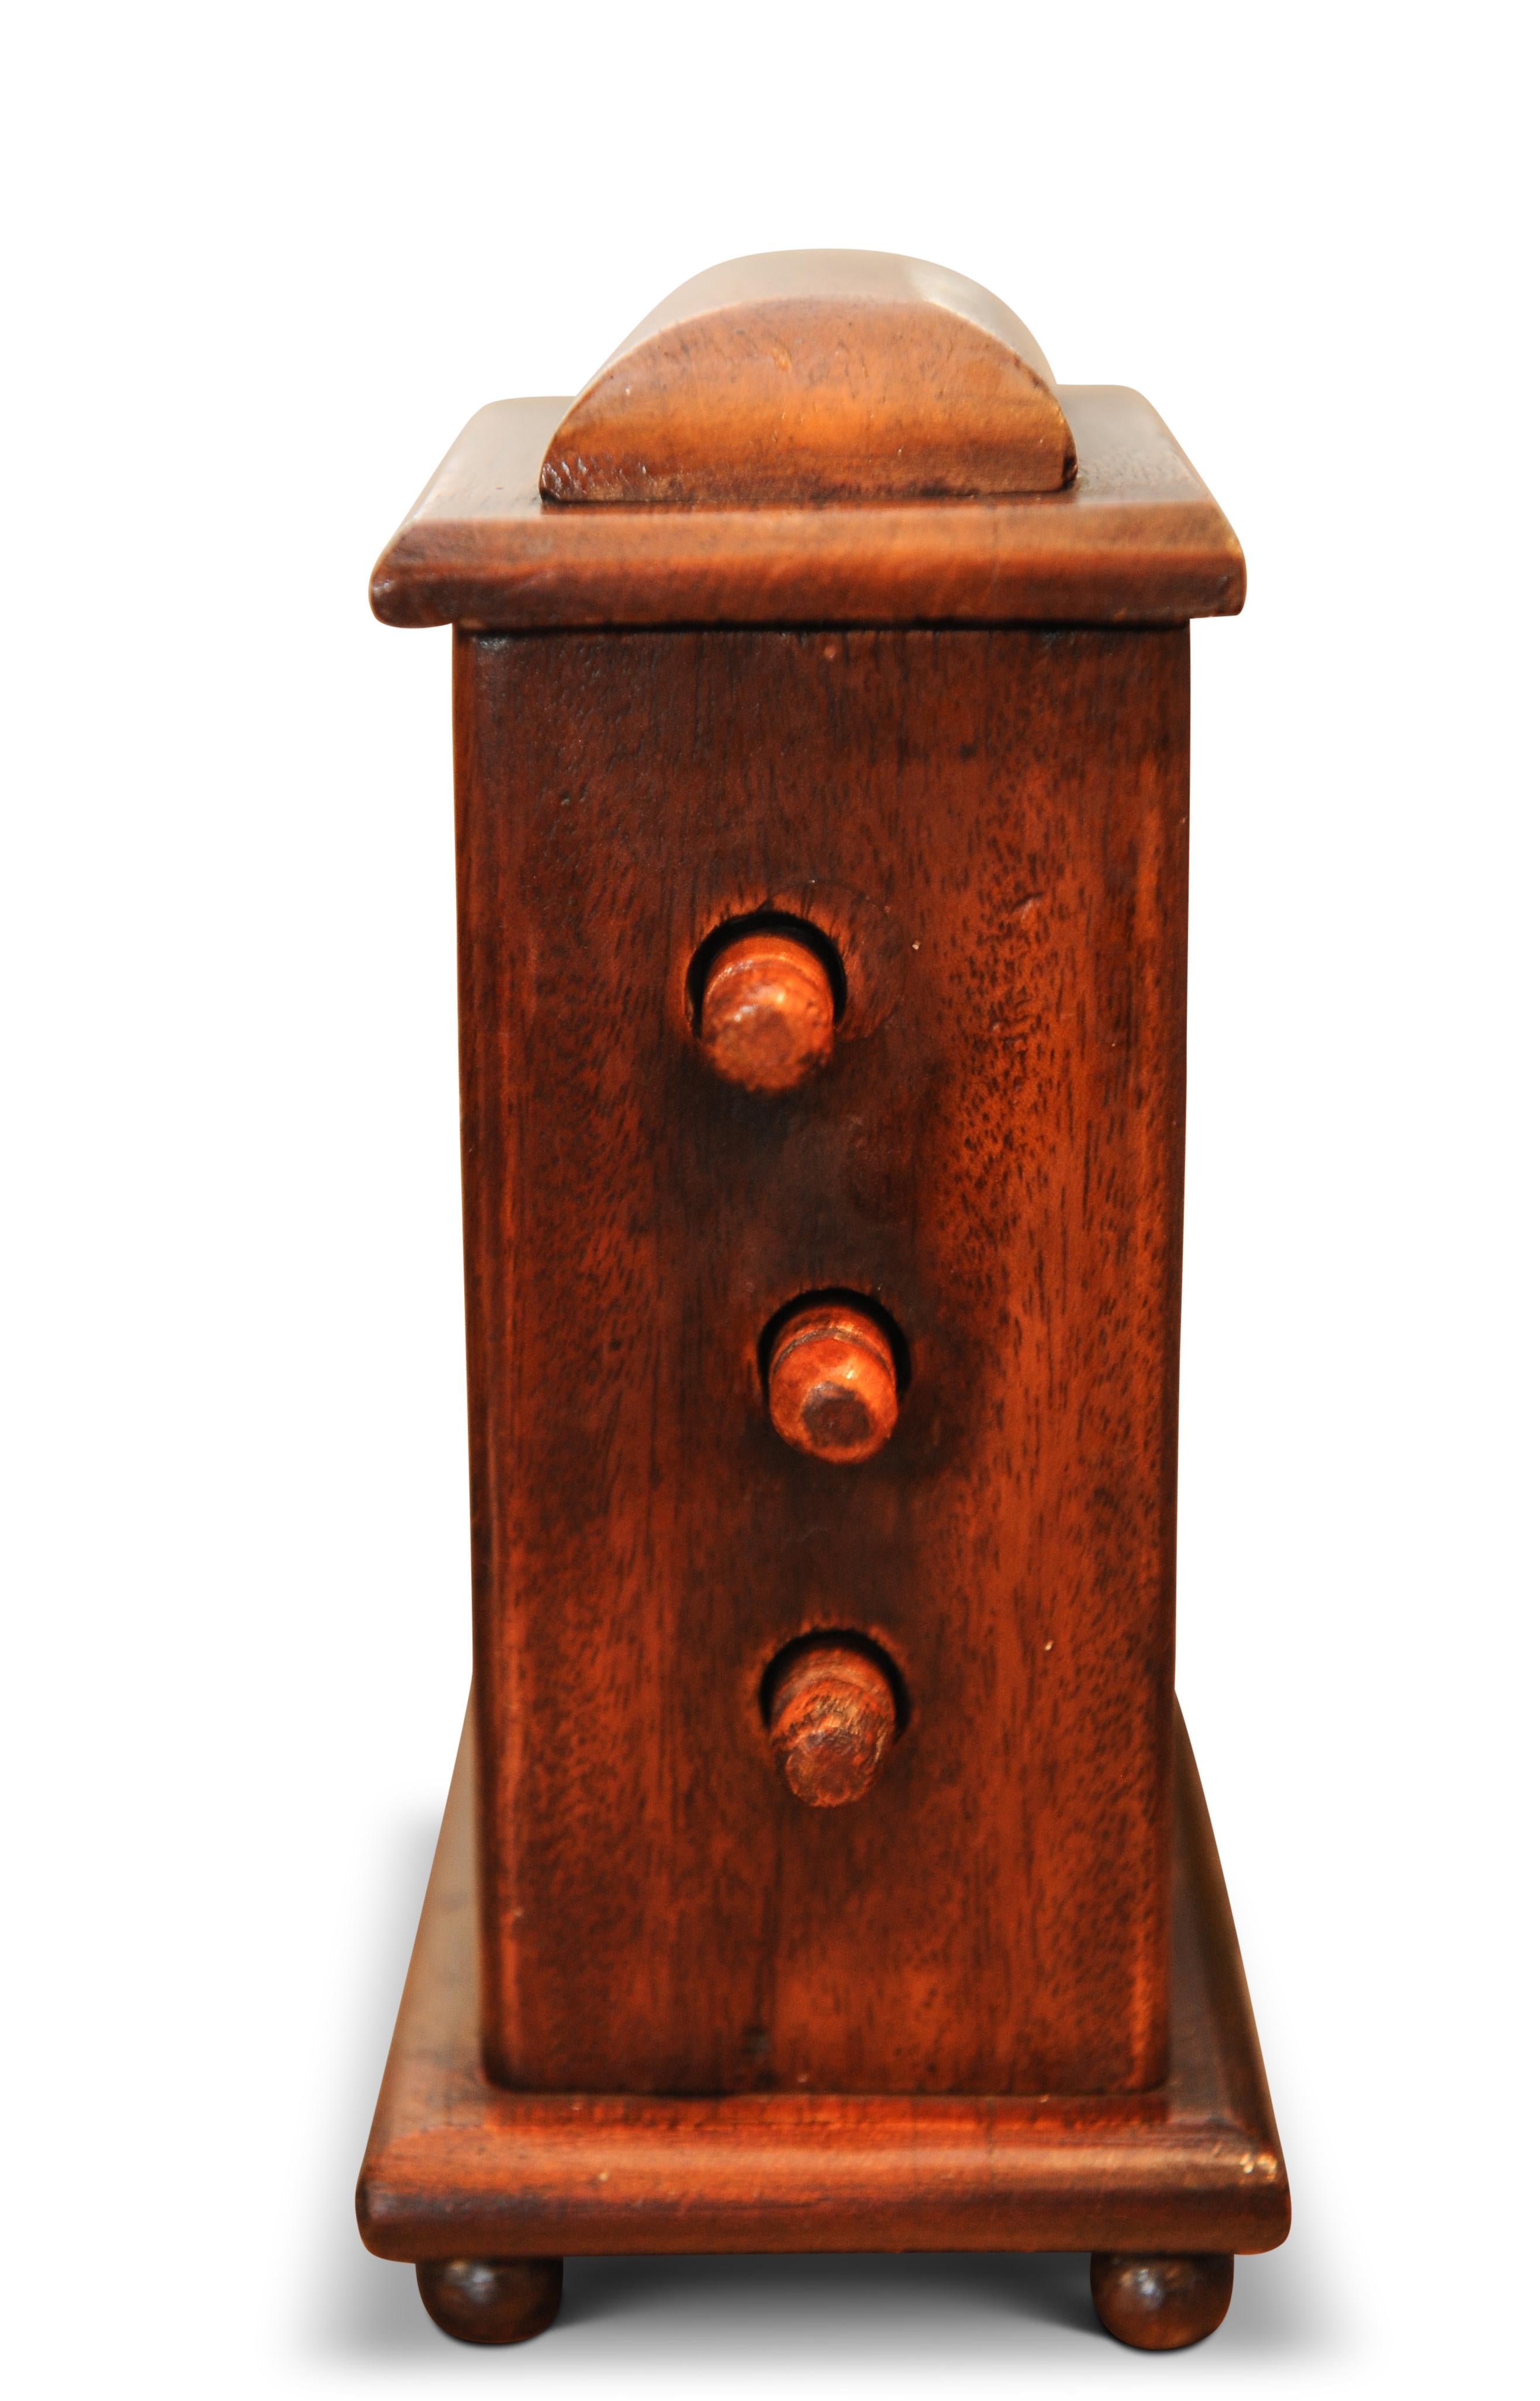 Late Victorian 1920s Oak Desk Top Perpetual Calendar with Rotating Dials for Month, Day, Year For Sale